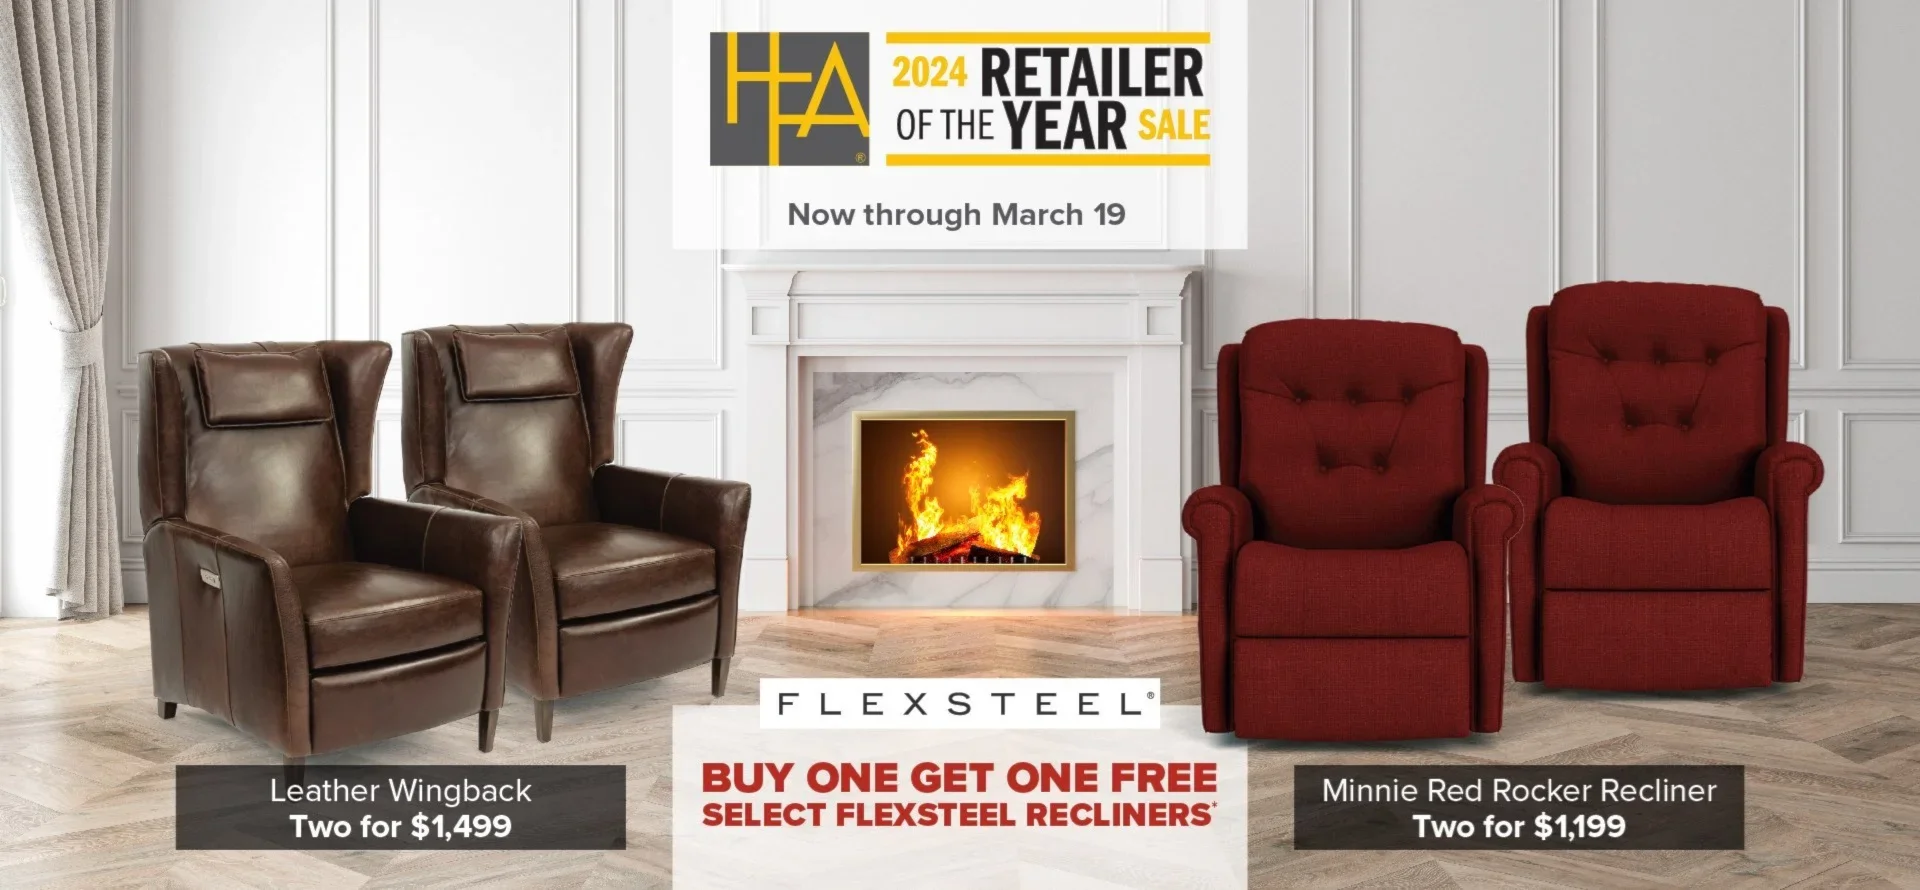 retailer of the year sale 